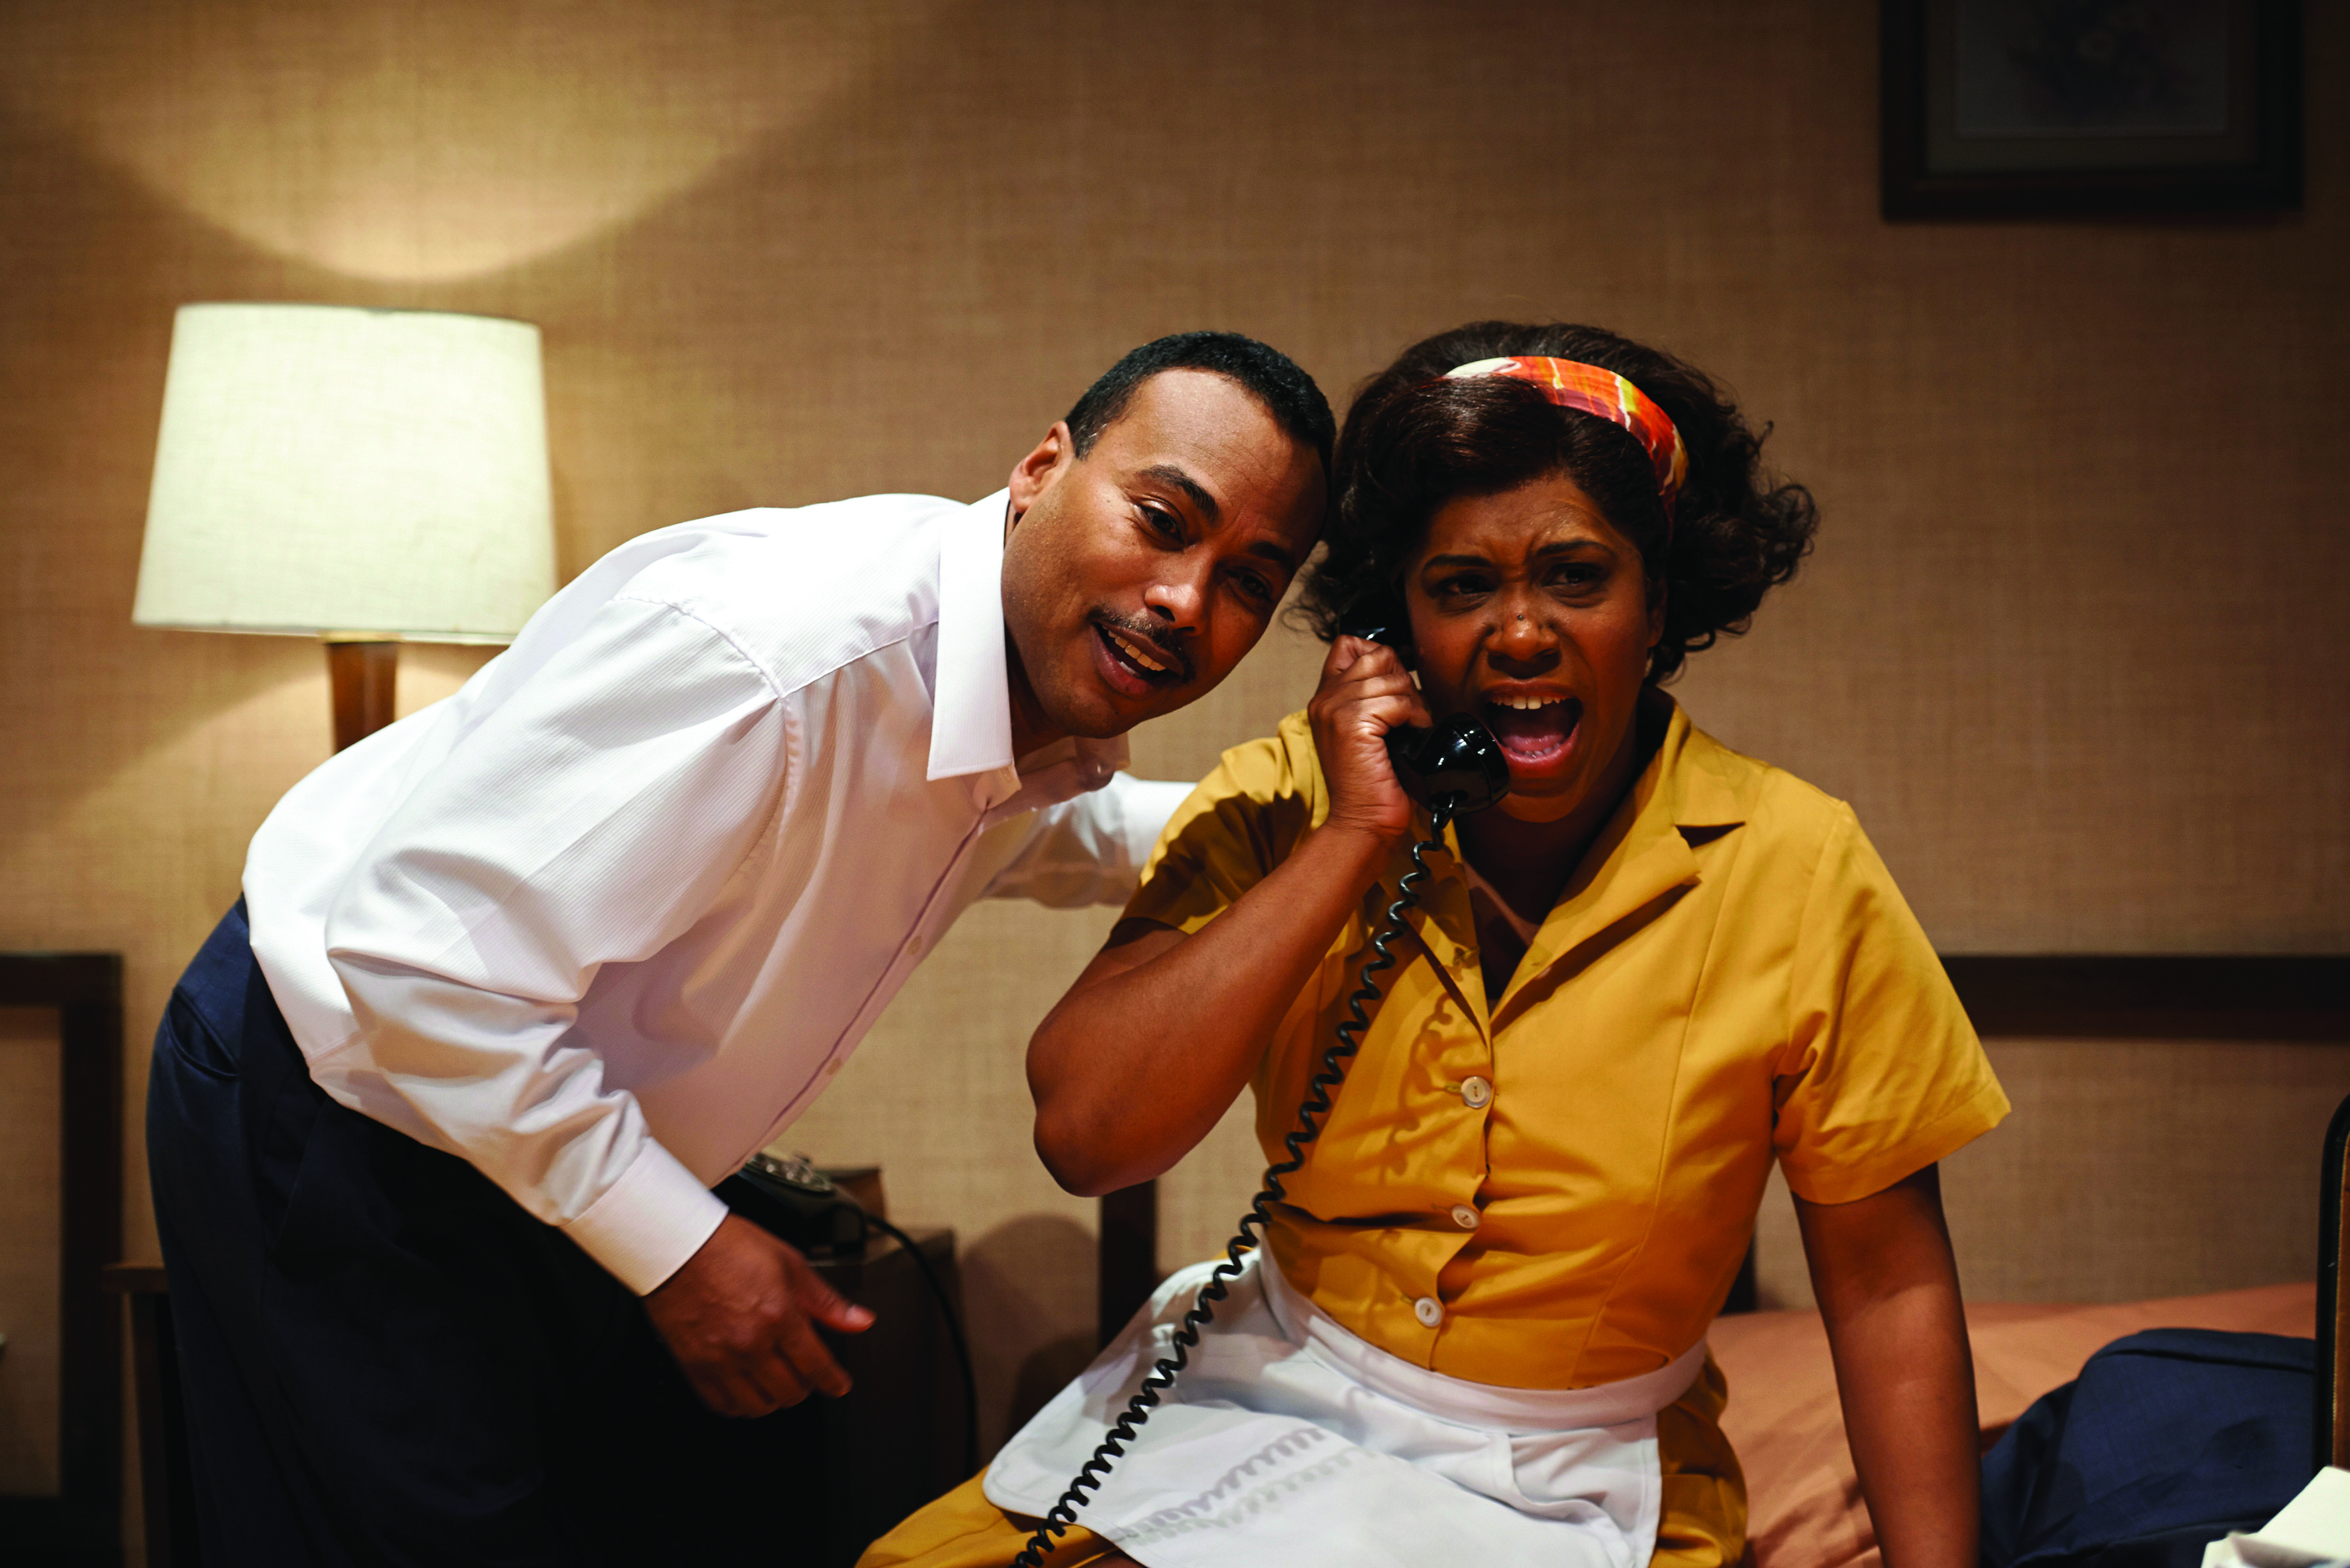 ETC’s “The Mountaintop” showscases excellent performances and effects